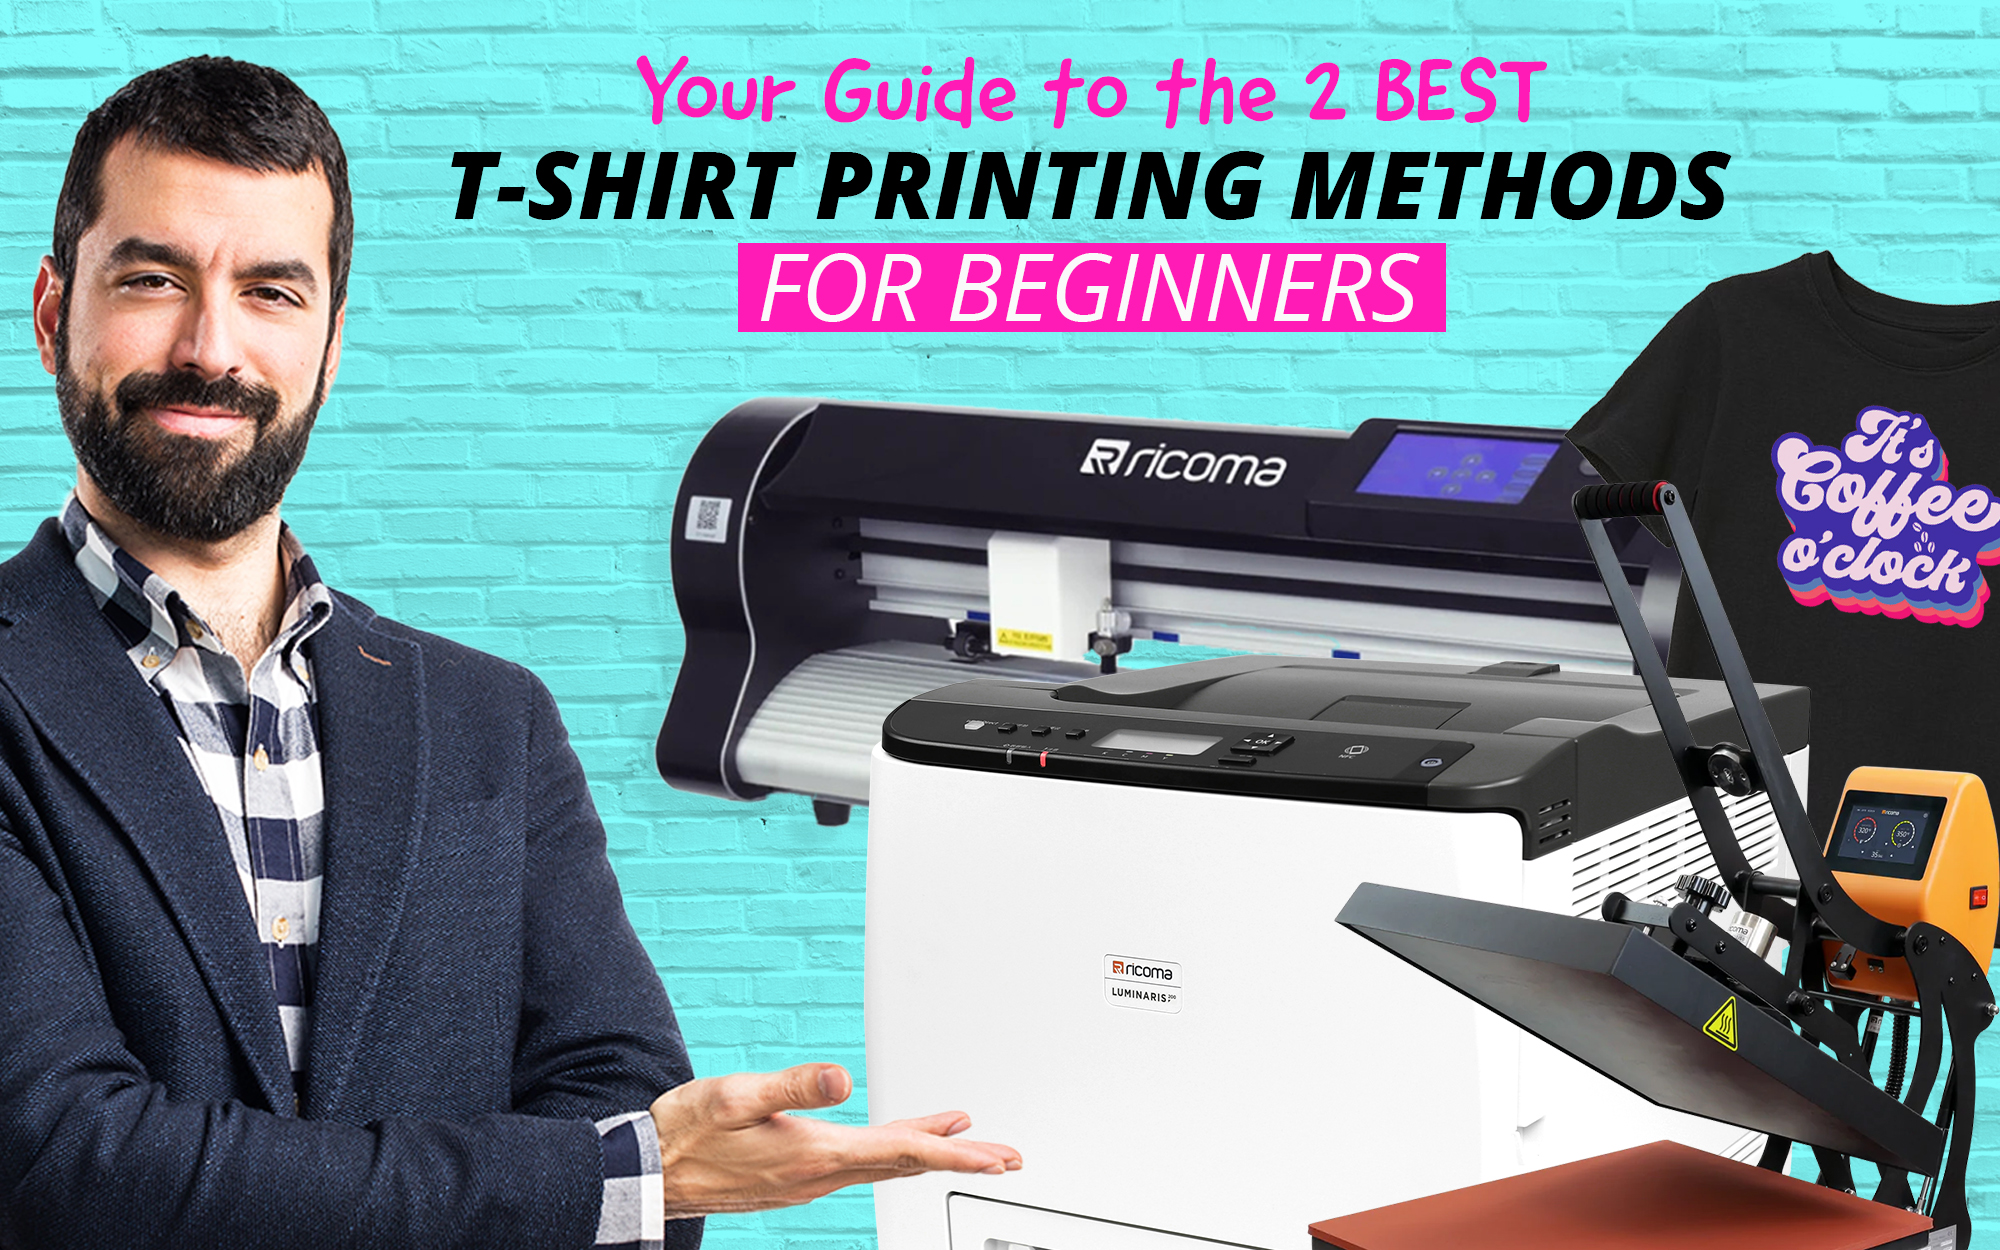 Family T-shirt printing business accelerates on-demand printing